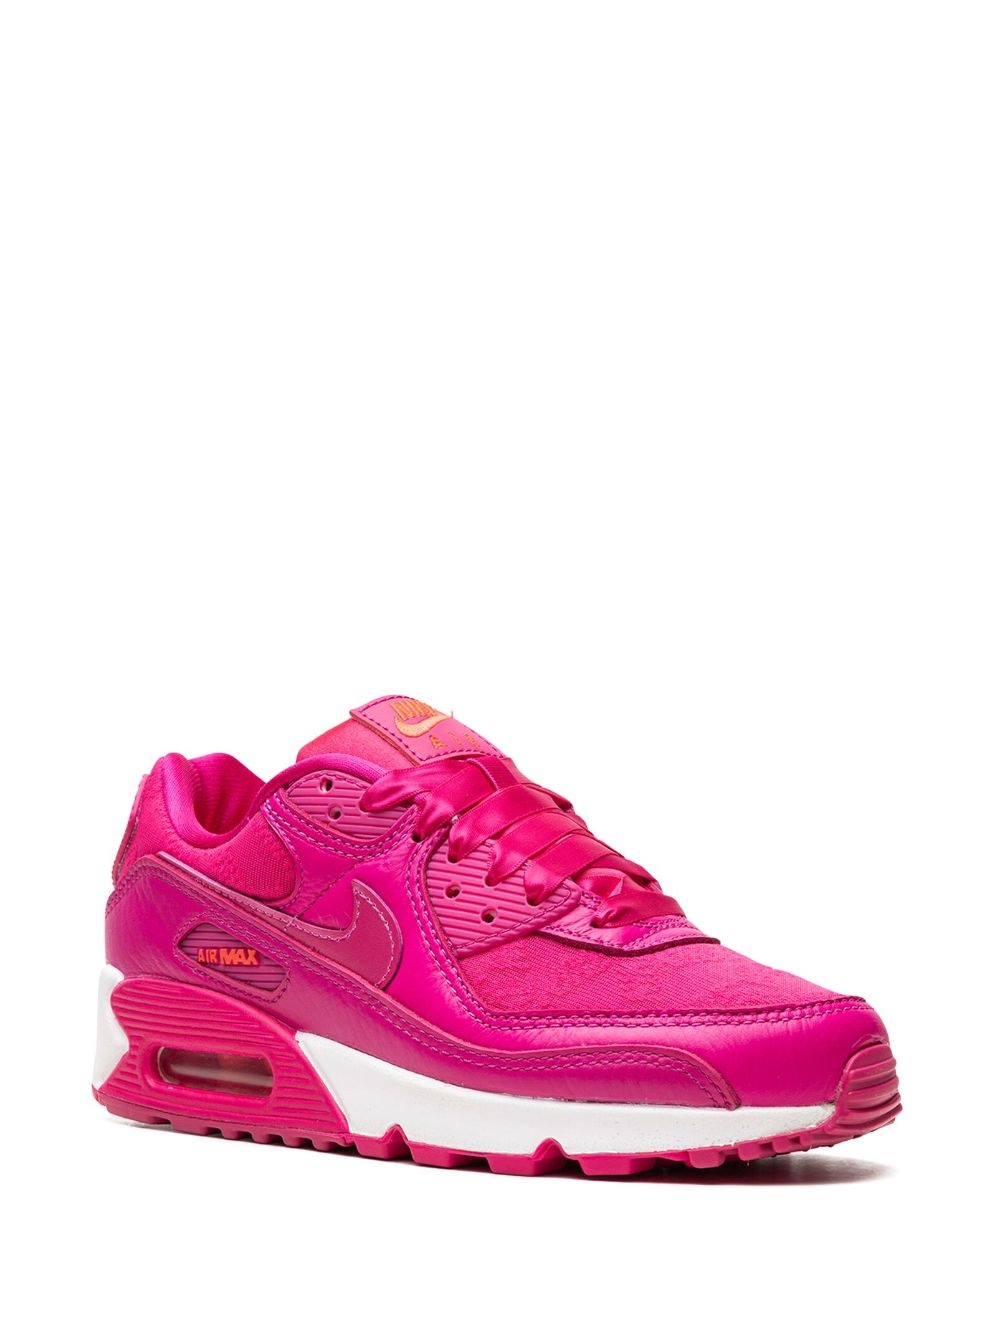 Air Max 90 "Valentine's Day (2022)" sneakers - 2